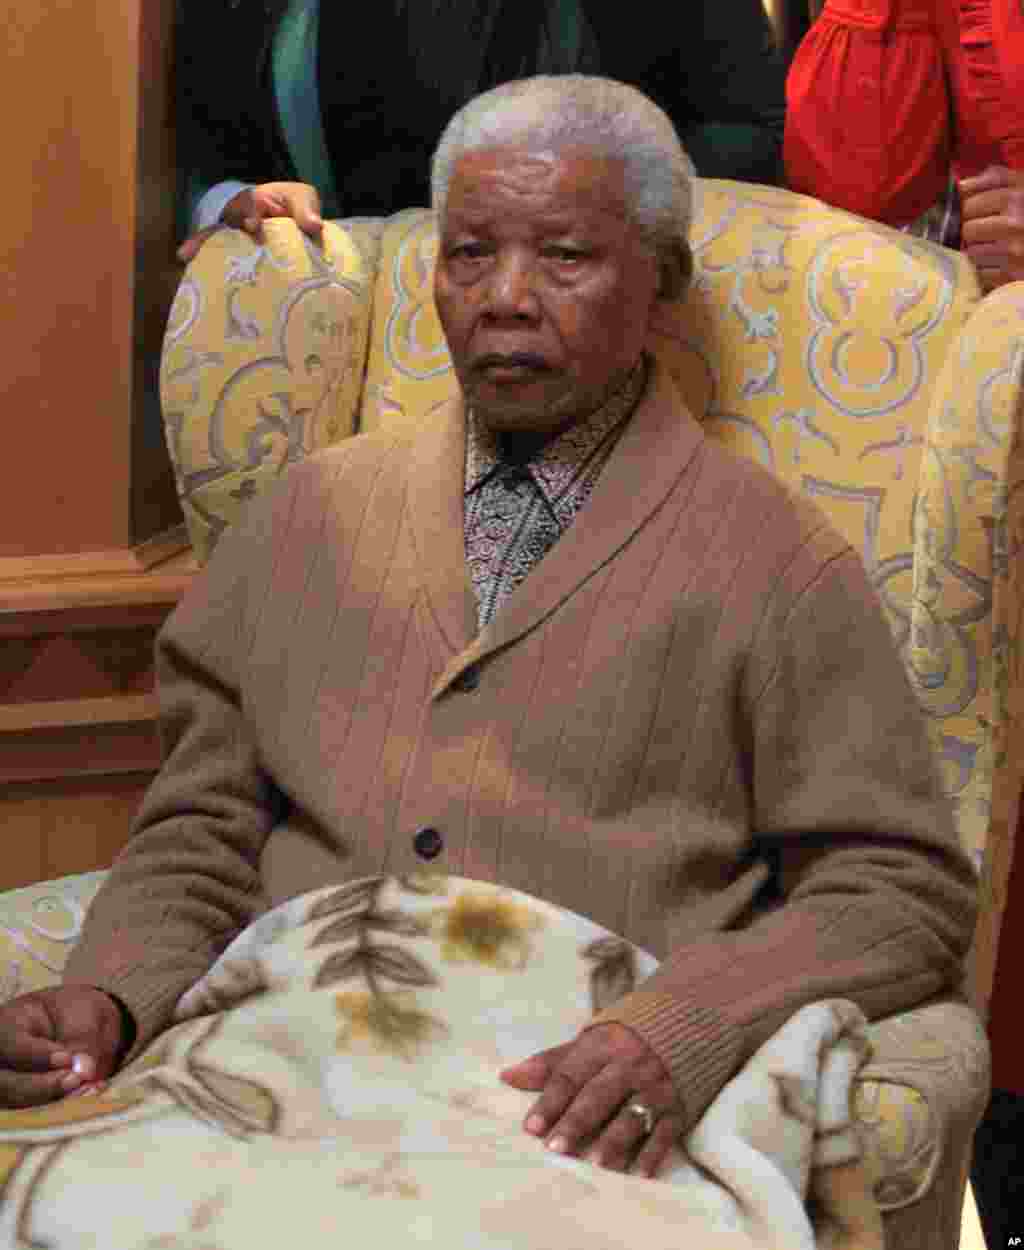 Mandela poses for a photograph after receiving a torch to celebrate the African National Congress&#39; centenary&nbsp; in his home village, Qunu, in rural eastern South Africa, May 30, 2012.